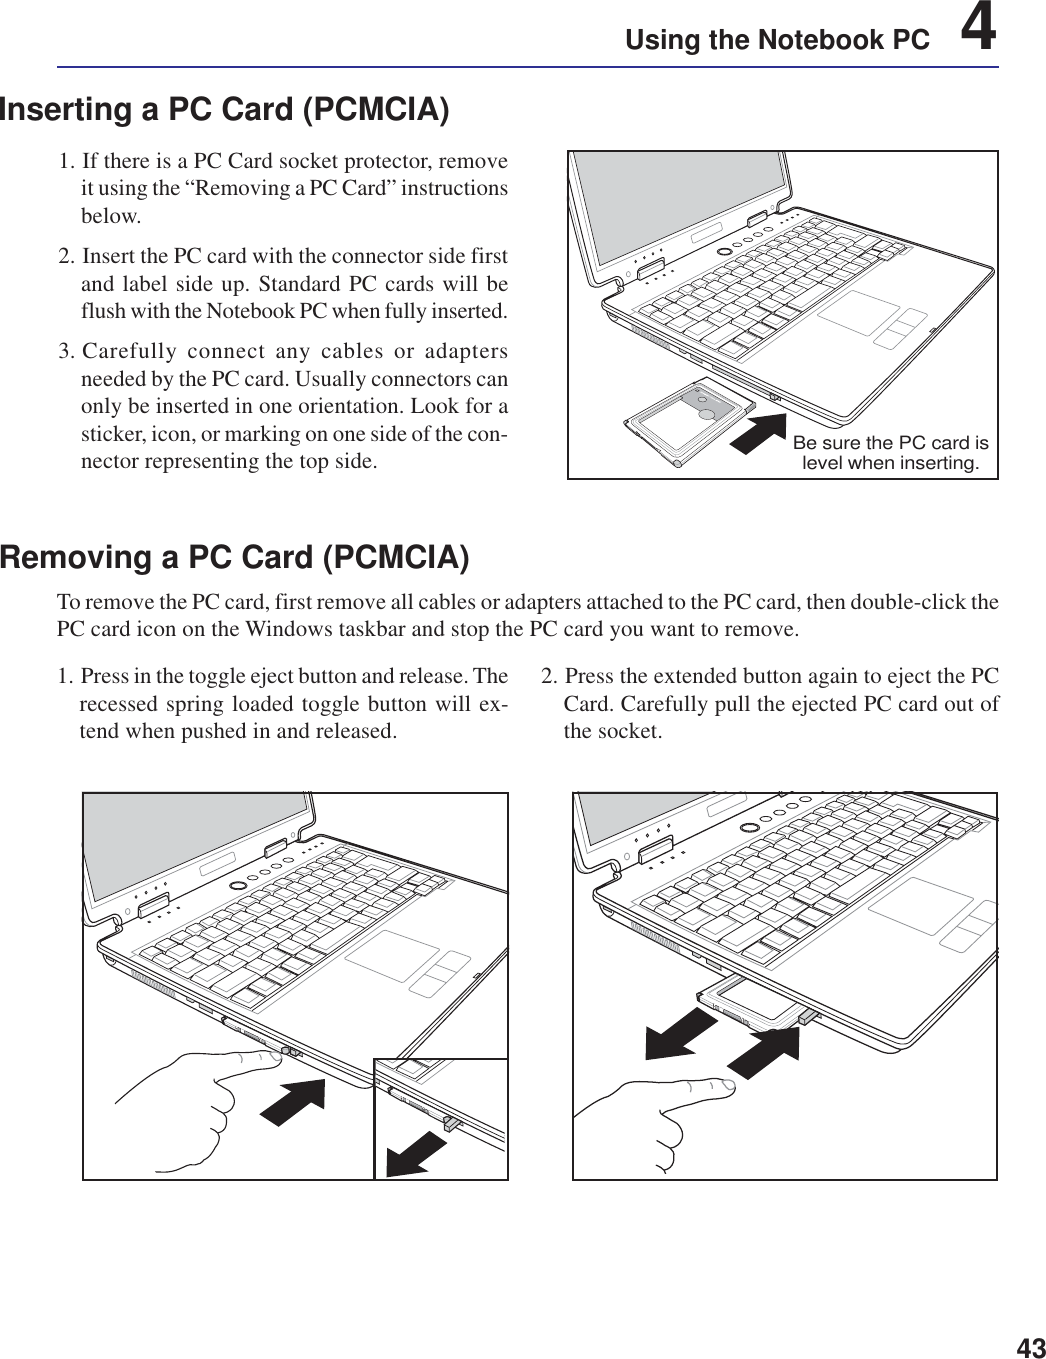 43Using the Notebook PC    4Inserting a PC Card (PCMCIA)1. If there is a PC Card socket protector, removeit using the “Removing a PC Card” instructionsbelow.2. Insert the PC card with the connector side firstand label side up. Standard PC cards will beflush with the Notebook PC when fully inserted.3. Carefully connect any cables or adaptersneeded by the PC card. Usually connectors canonly be inserted in one orientation. Look for asticker, icon, or marking on one side of the con-nector representing the top side.1. Press in the toggle eject button and release. Therecessed spring loaded toggle button will ex-tend when pushed in and released.2. Press the extended button again to eject the PCCard. Carefully pull the ejected PC card out ofthe socket.Removing a PC Card (PCMCIA)To remove the PC card, first remove all cables or adapters attached to the PC card, then double-click thePC card icon on the Windows taskbar and stop the PC card you want to remove.Be sure the PC card islevel when inserting.